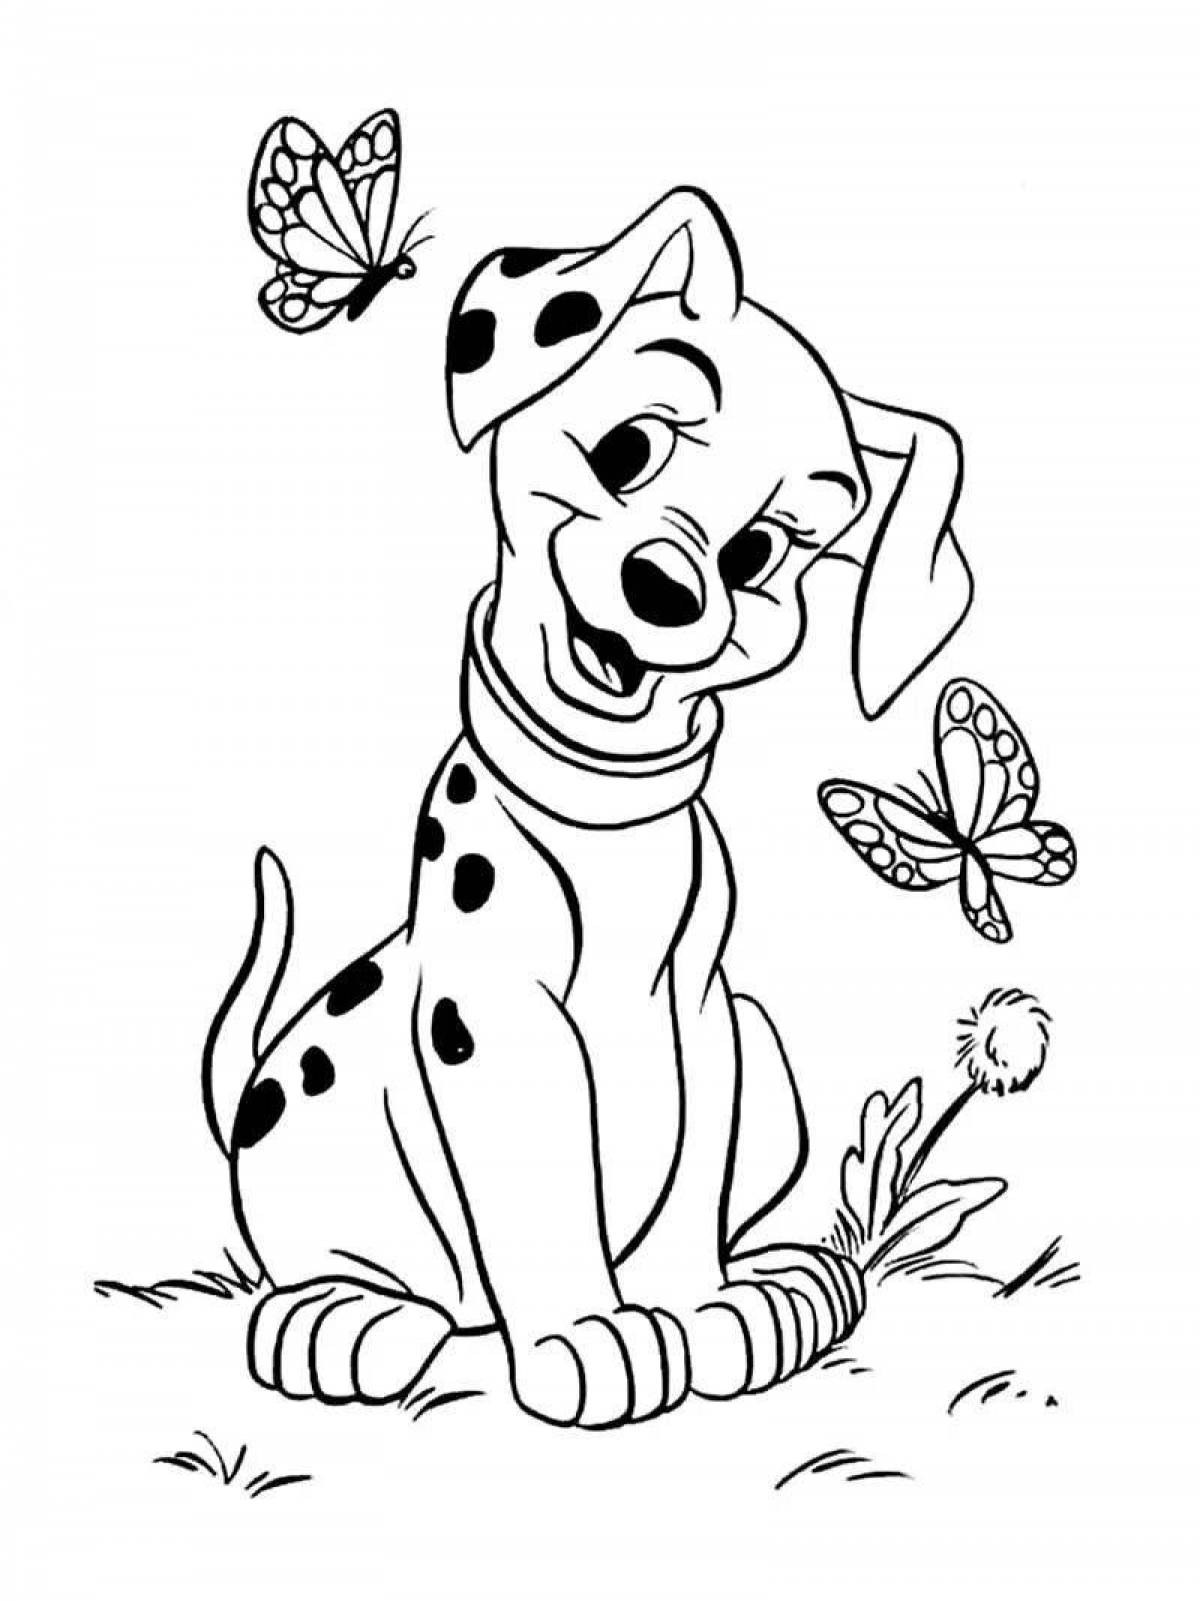 Coloring page energetic dalmatian